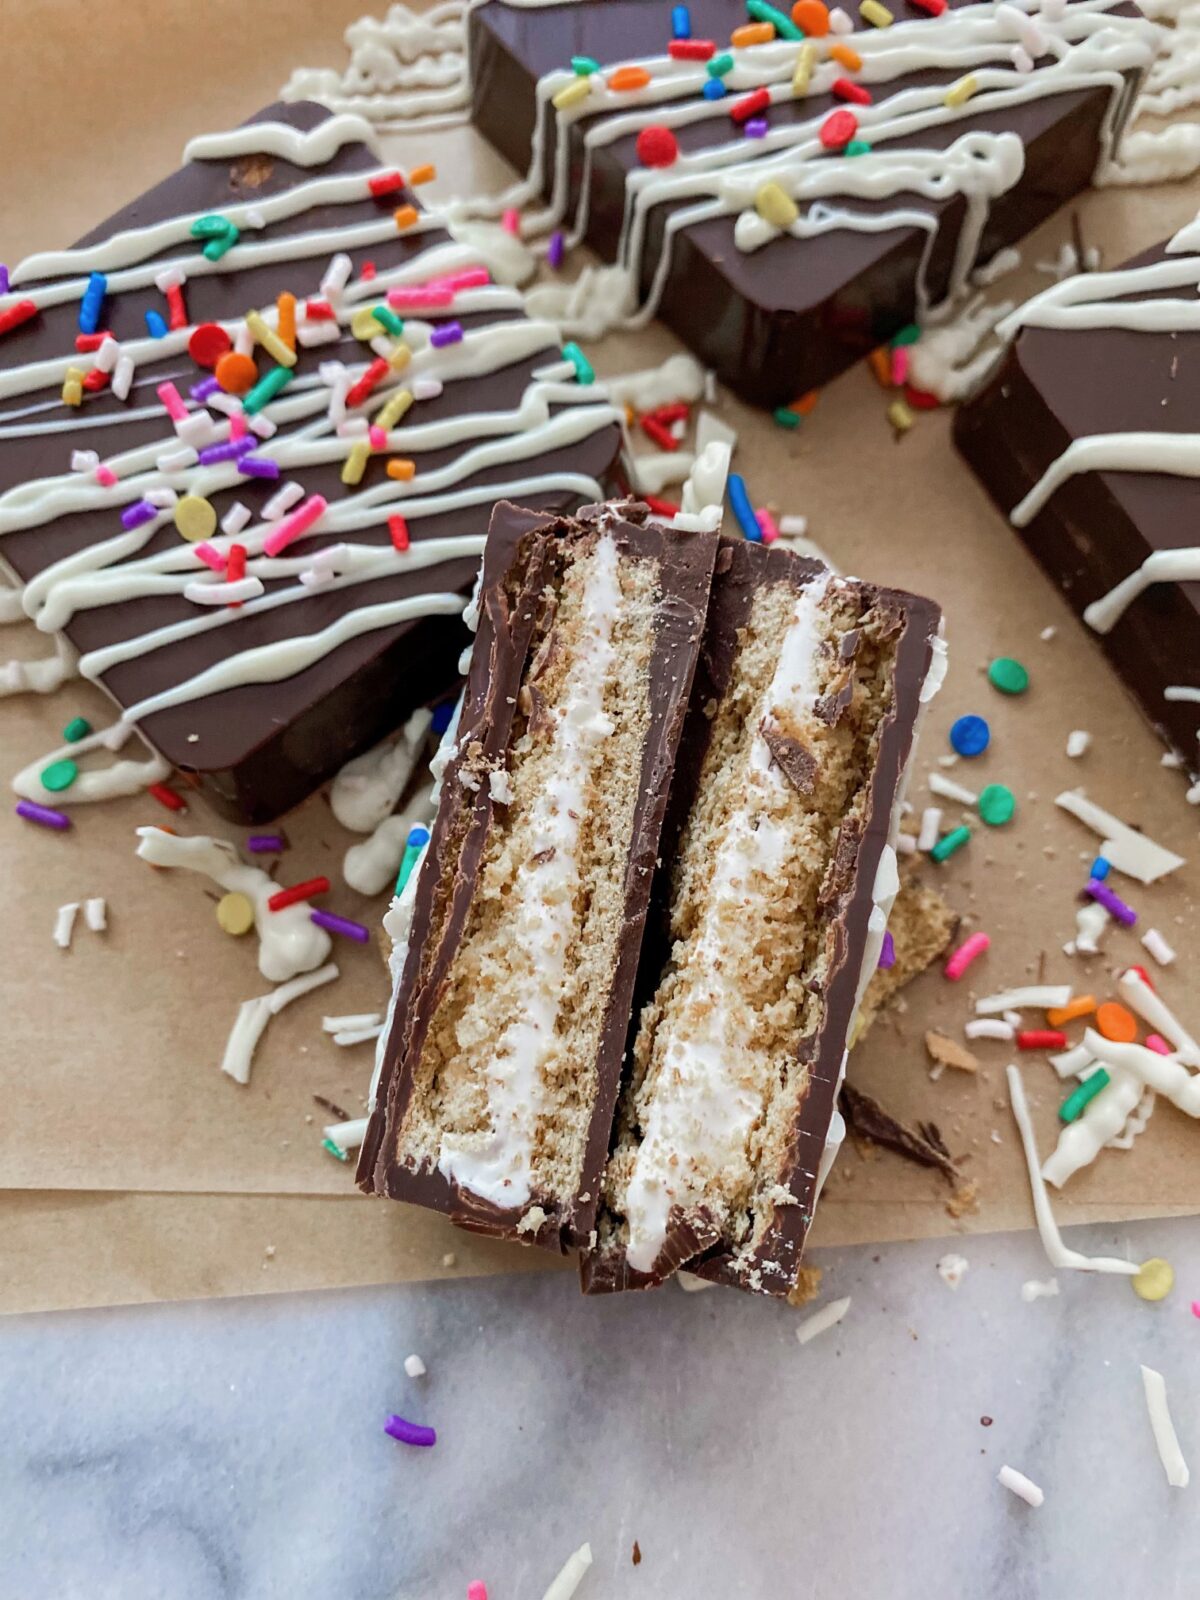 Easy chocolate covered s'mores recipe requires no fire to create this delicious campfire treat!